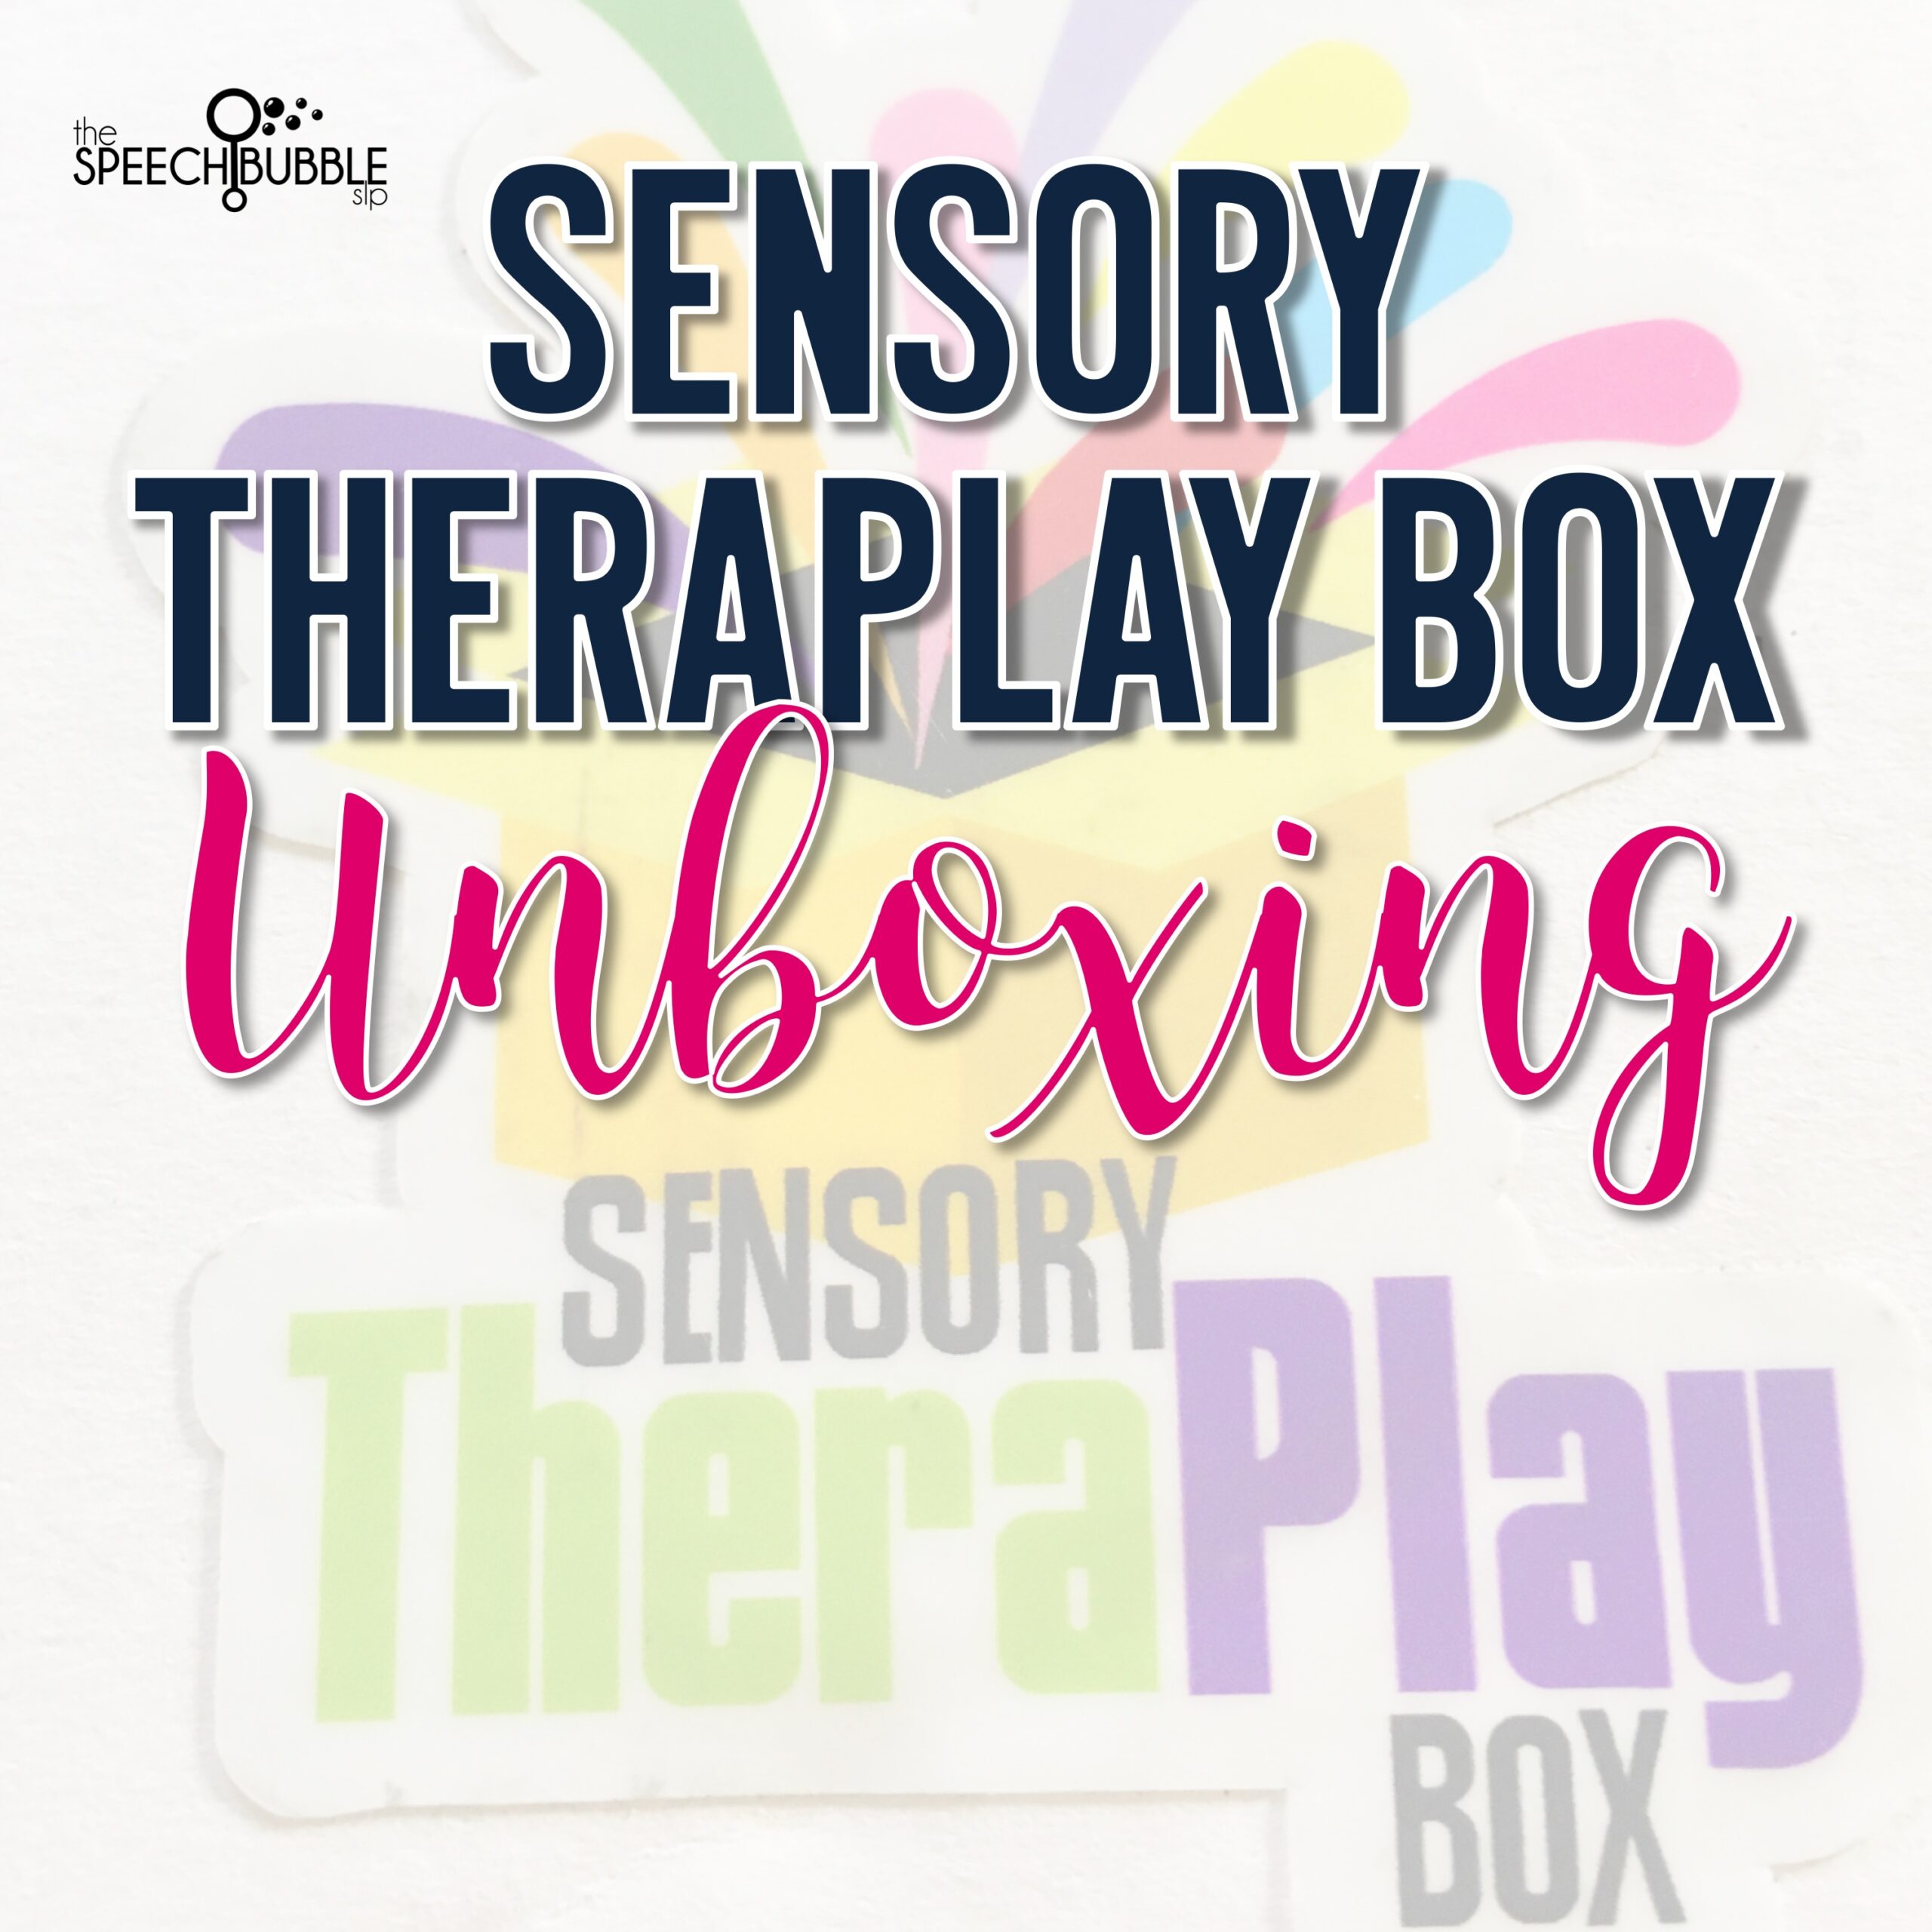 Sensory TheraPlay Box – What You Want to Know